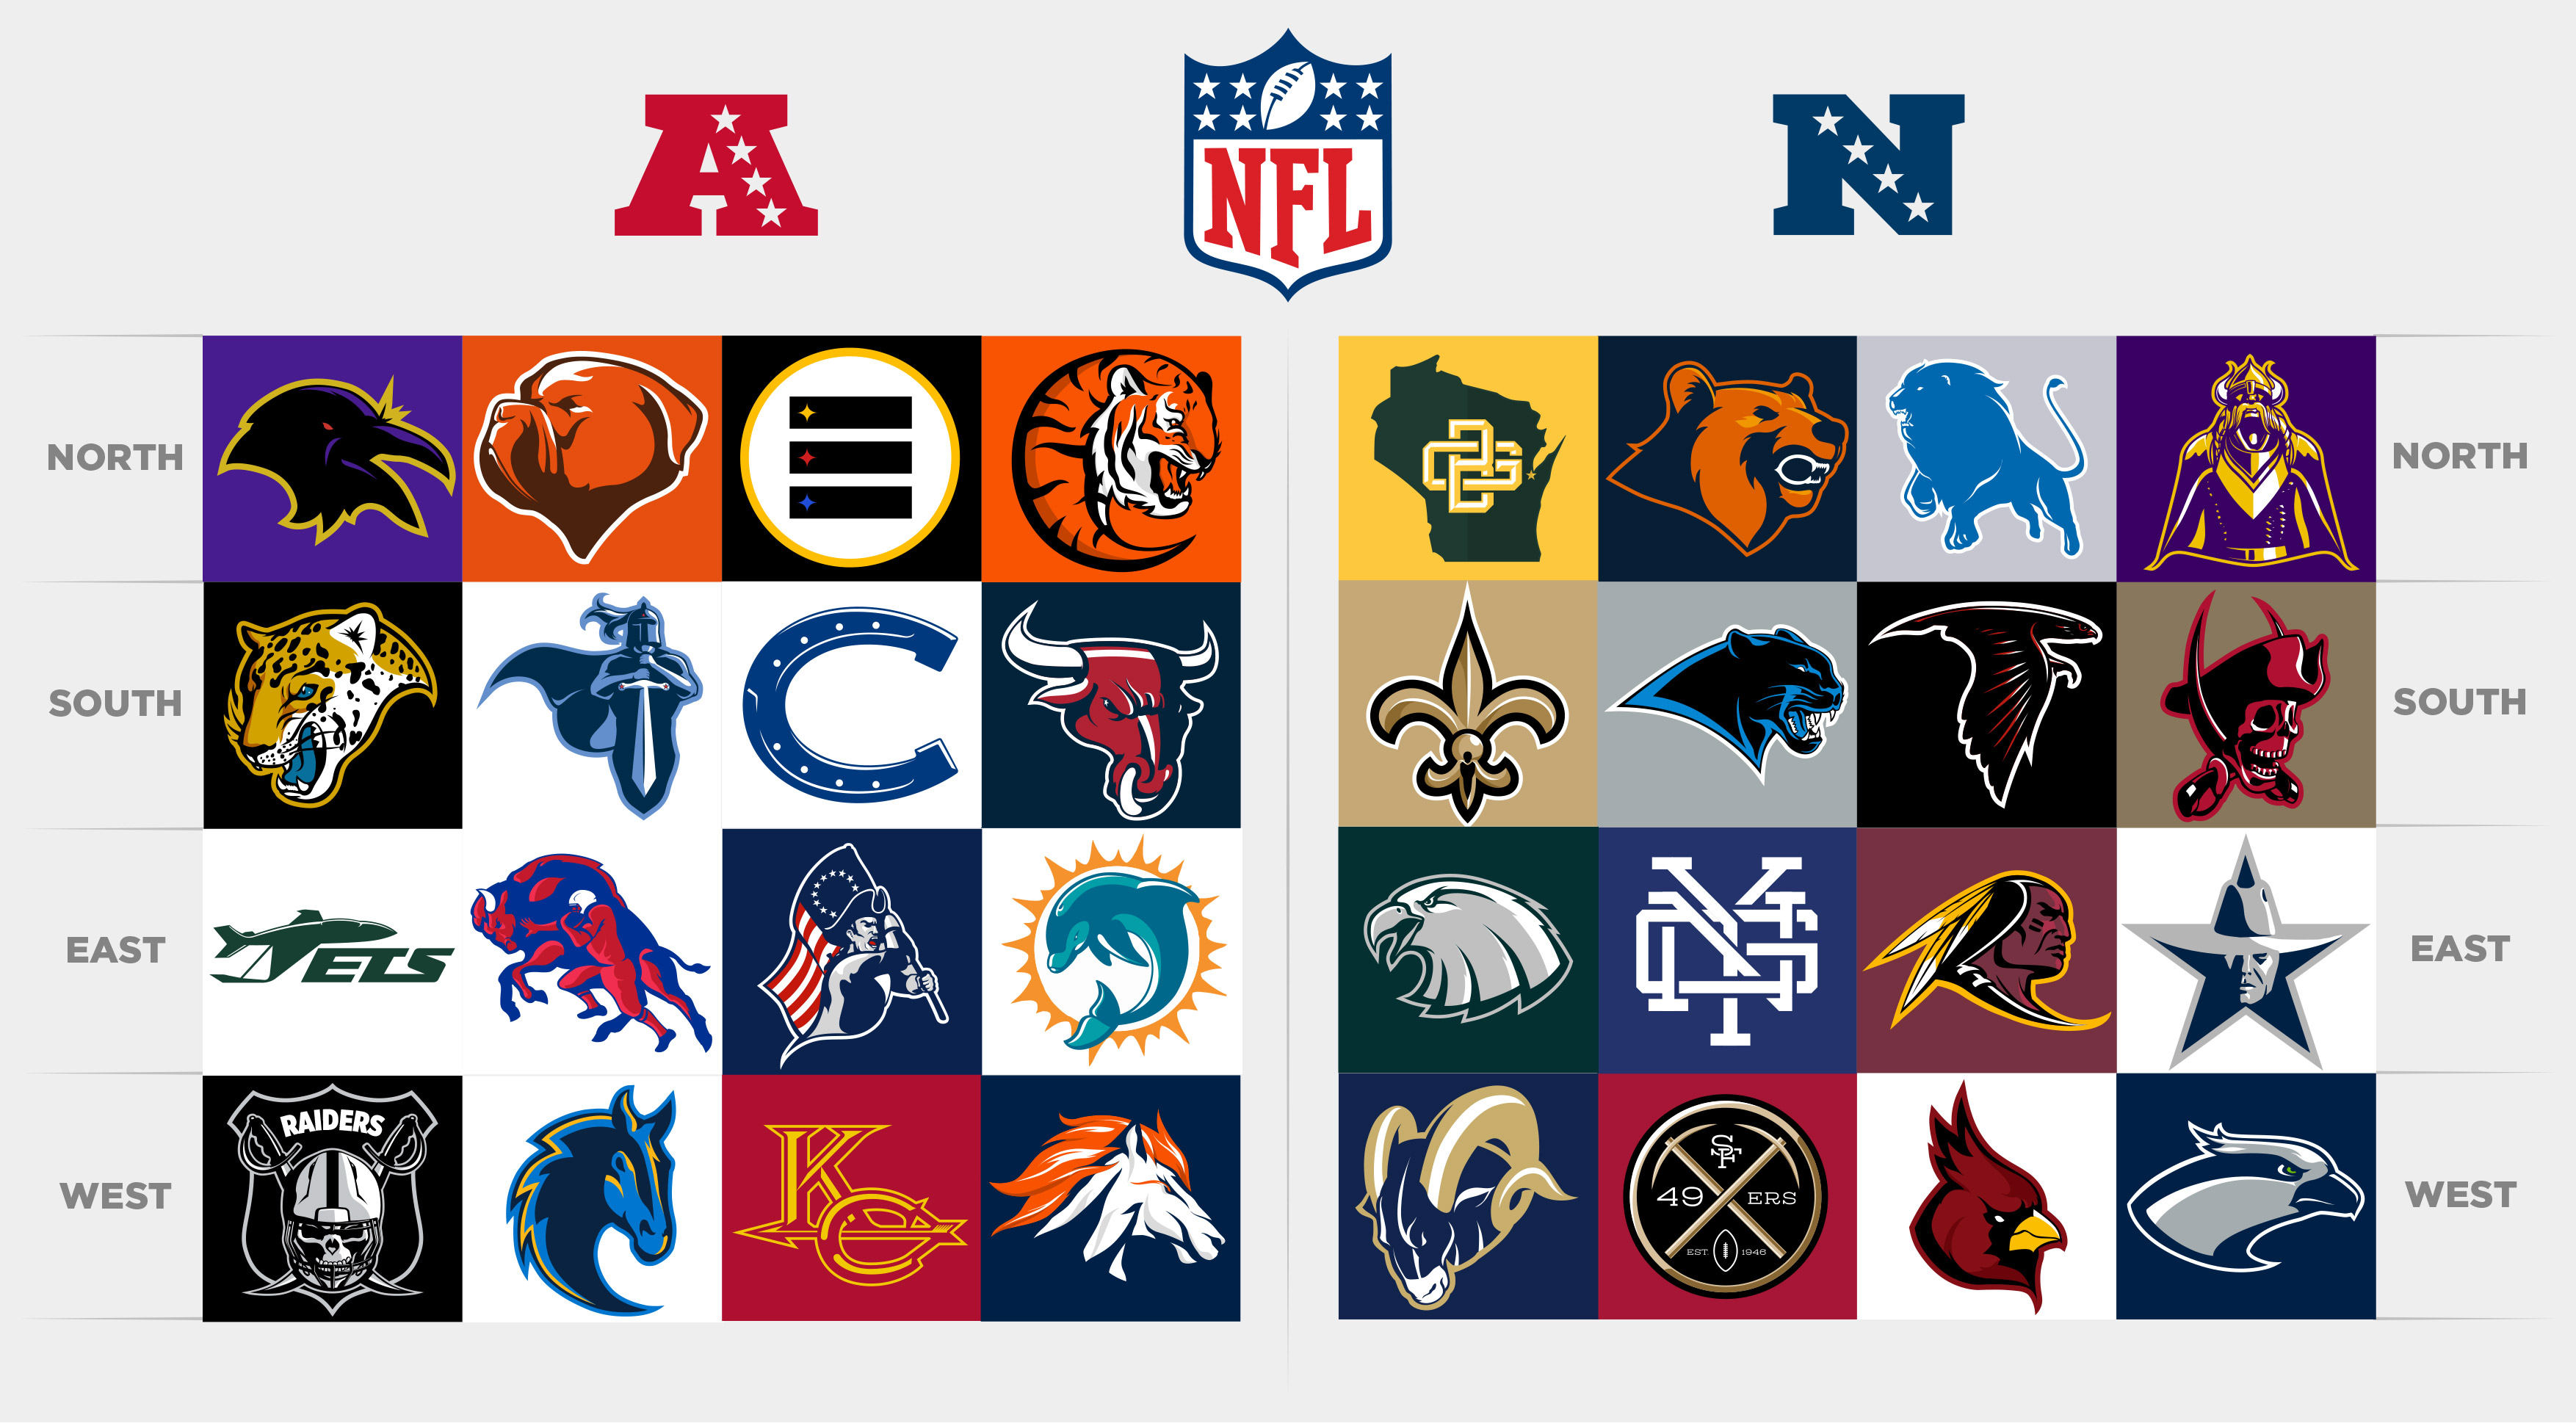 Check Out (And Nitpick) These Redesigned NFL Logos